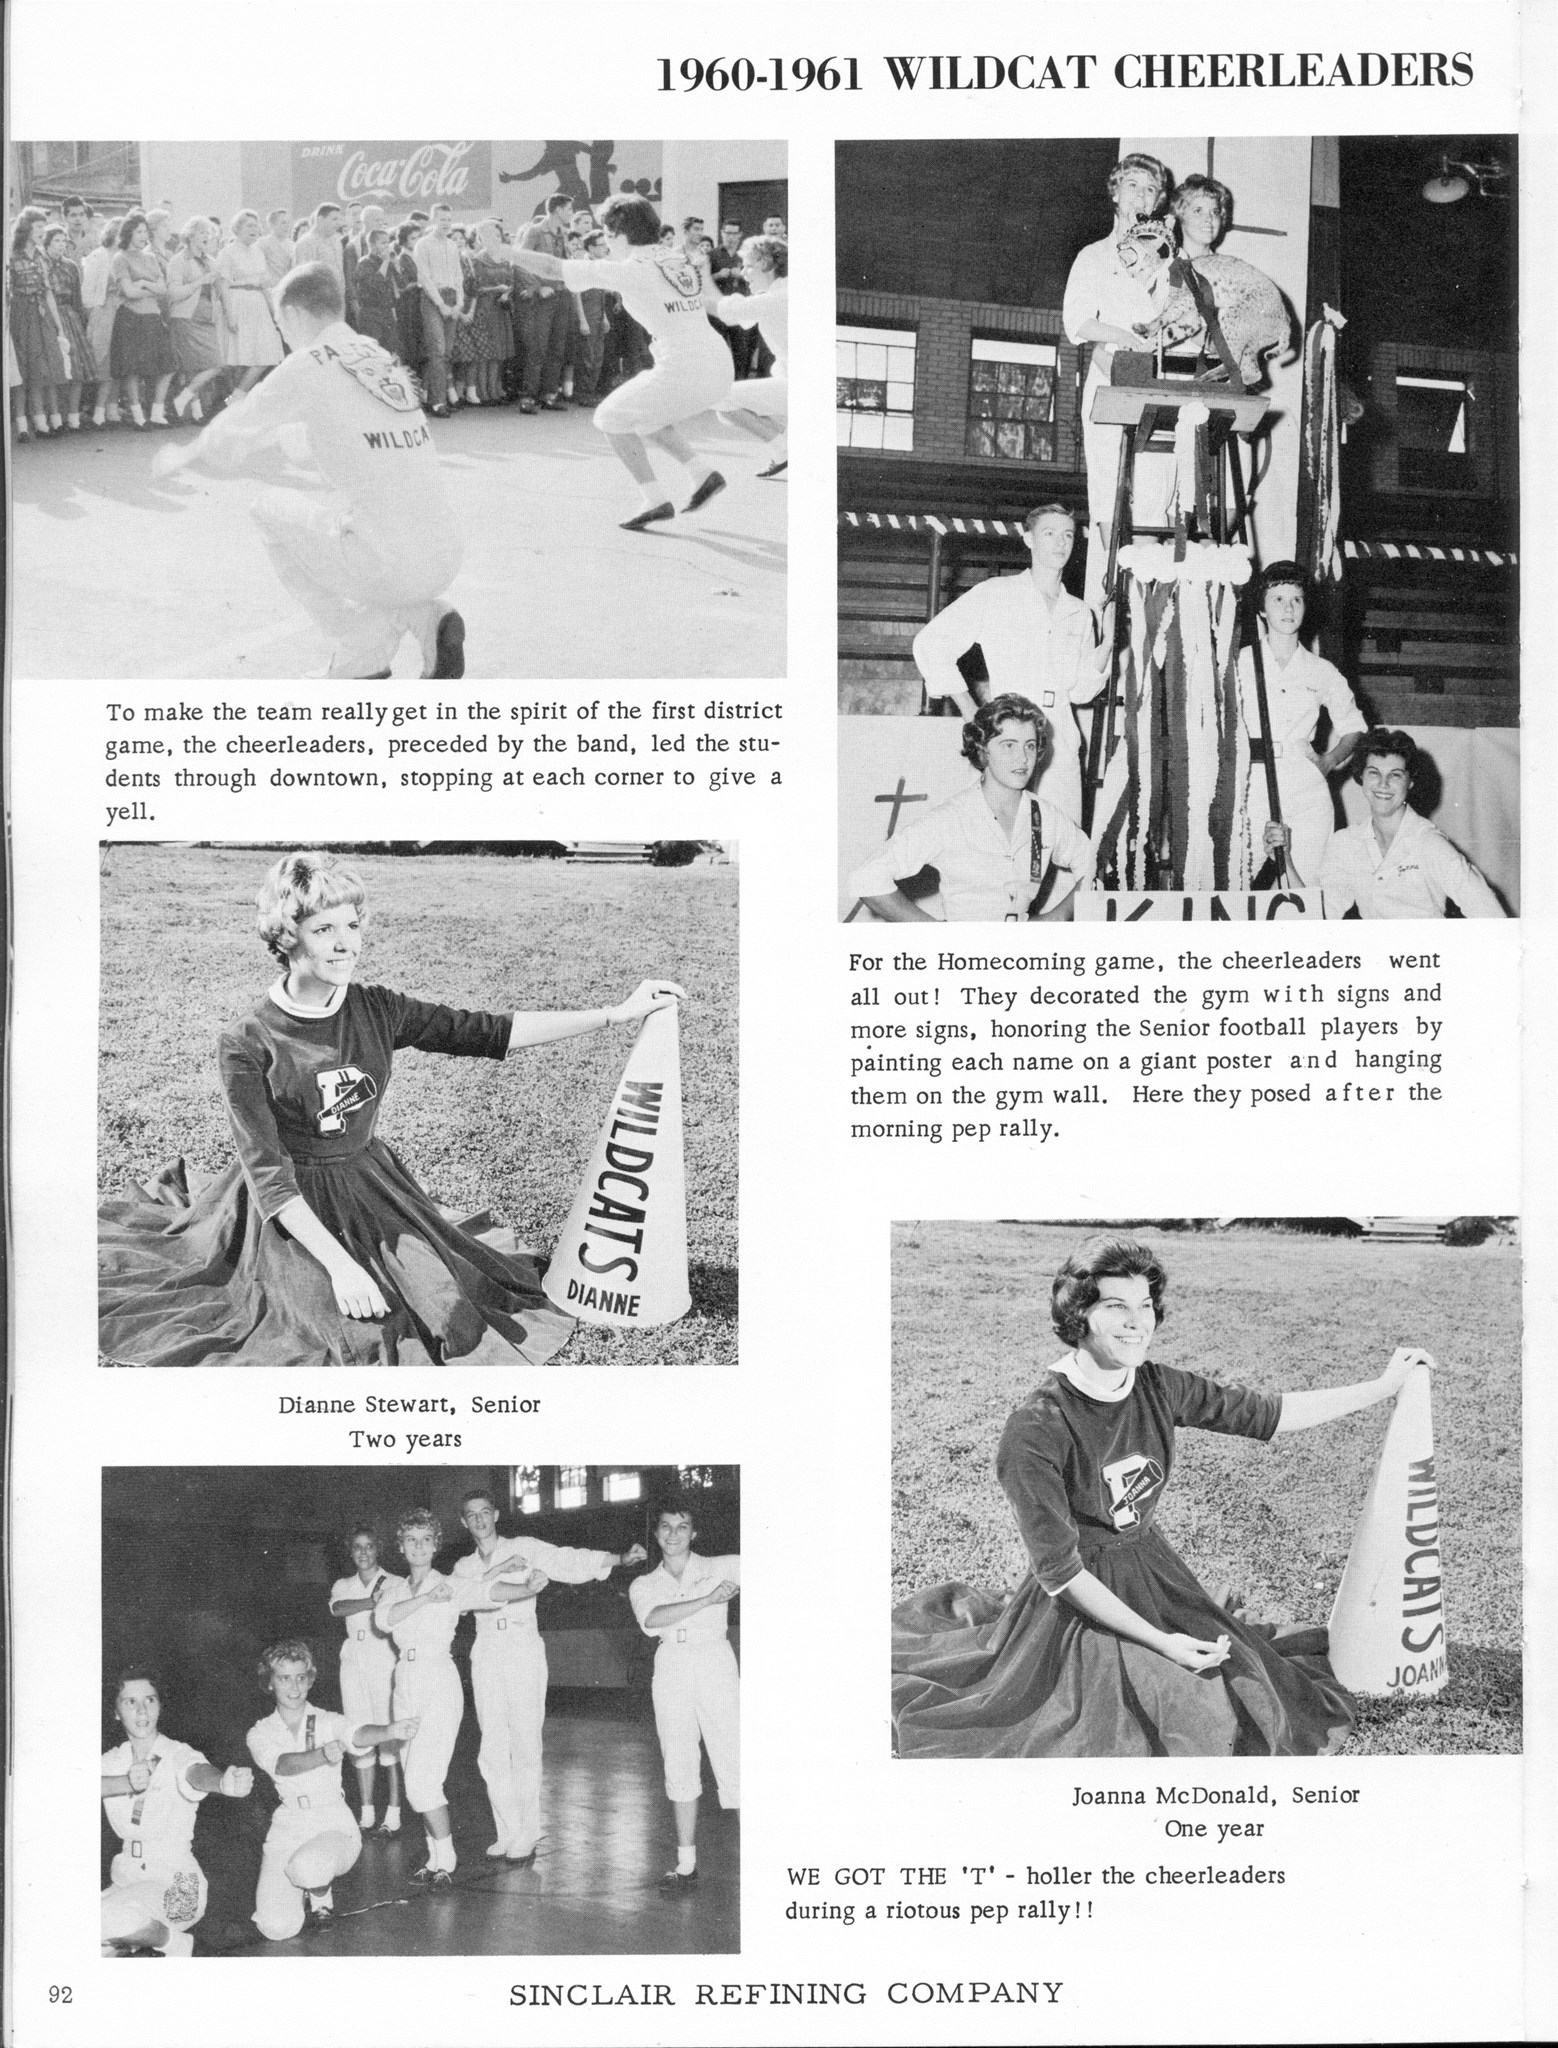 ../../../Images/Large/1961/Arclight-1961-pg0092.jpg